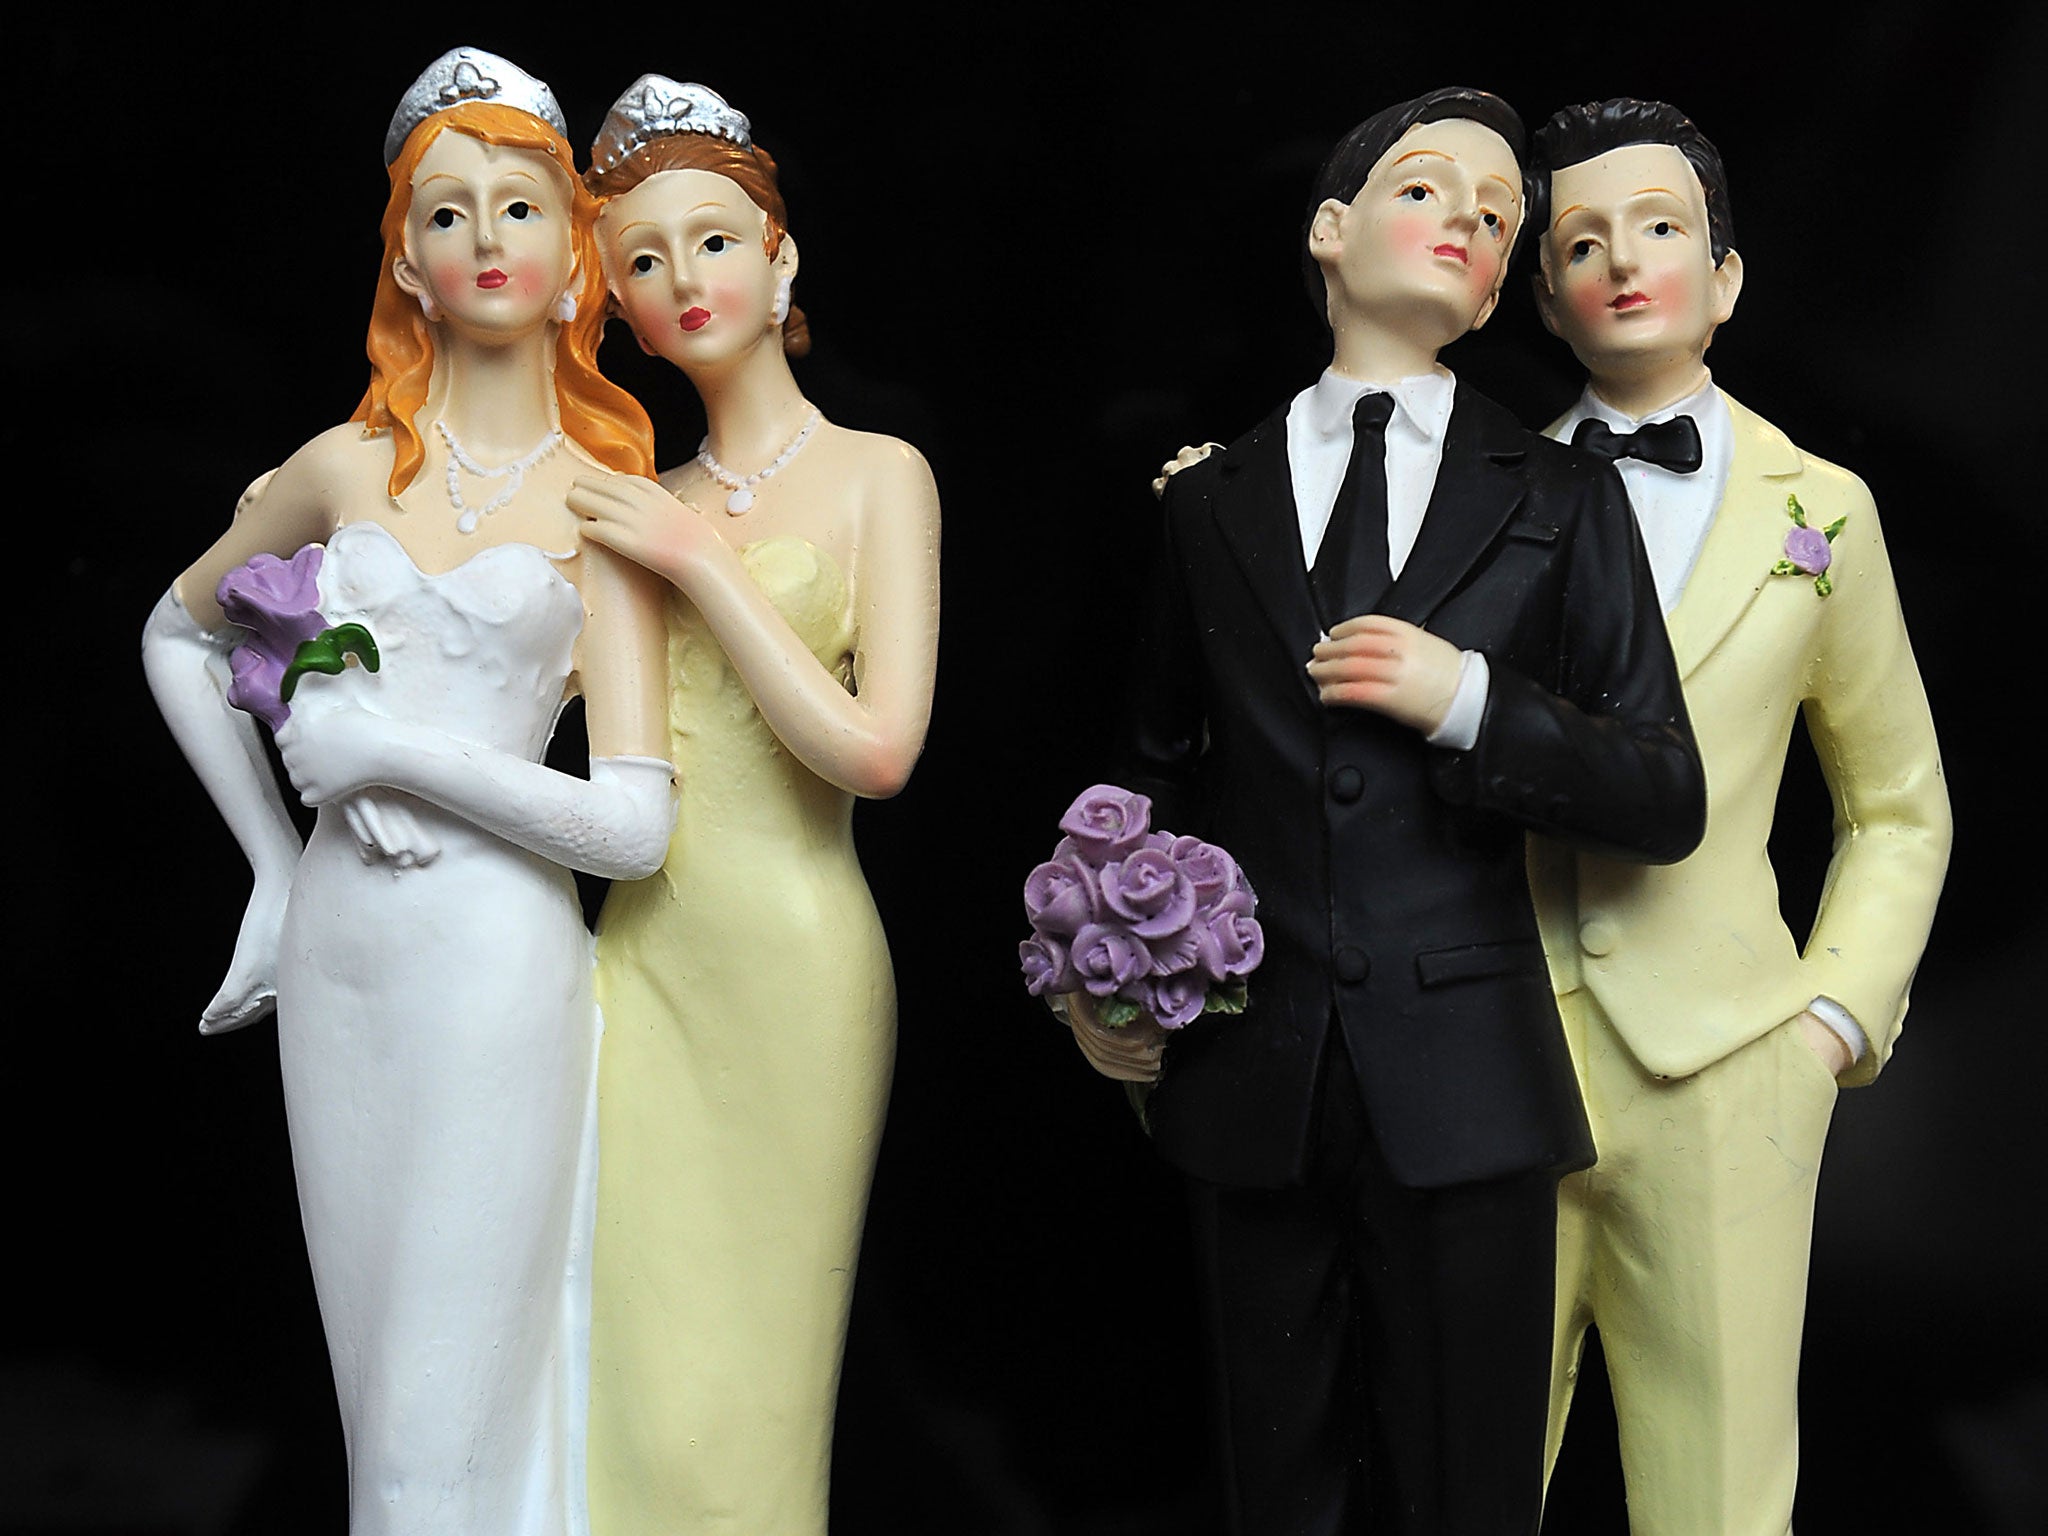 Plastic figurines of same-sex couples are displayed at the gay marriage show